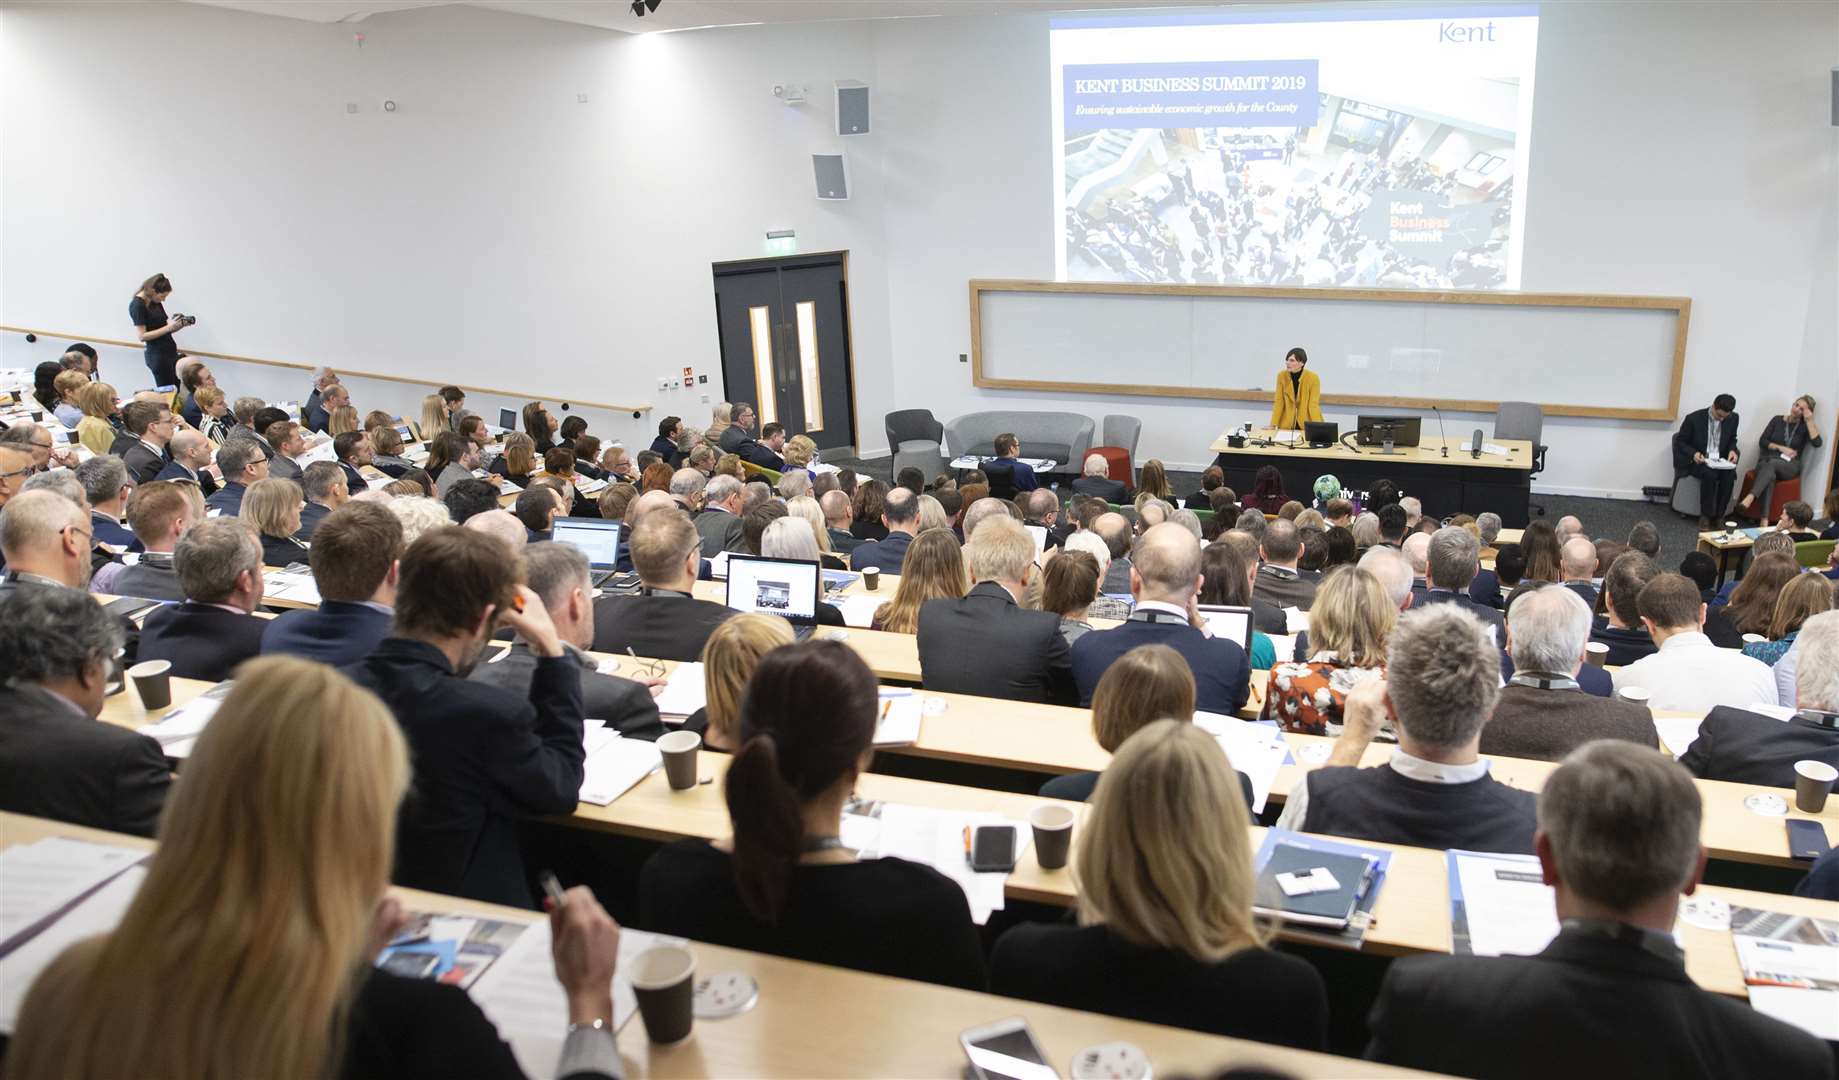 A host of experts will address delegates at the summit, held at the University of Kent's Sibson building